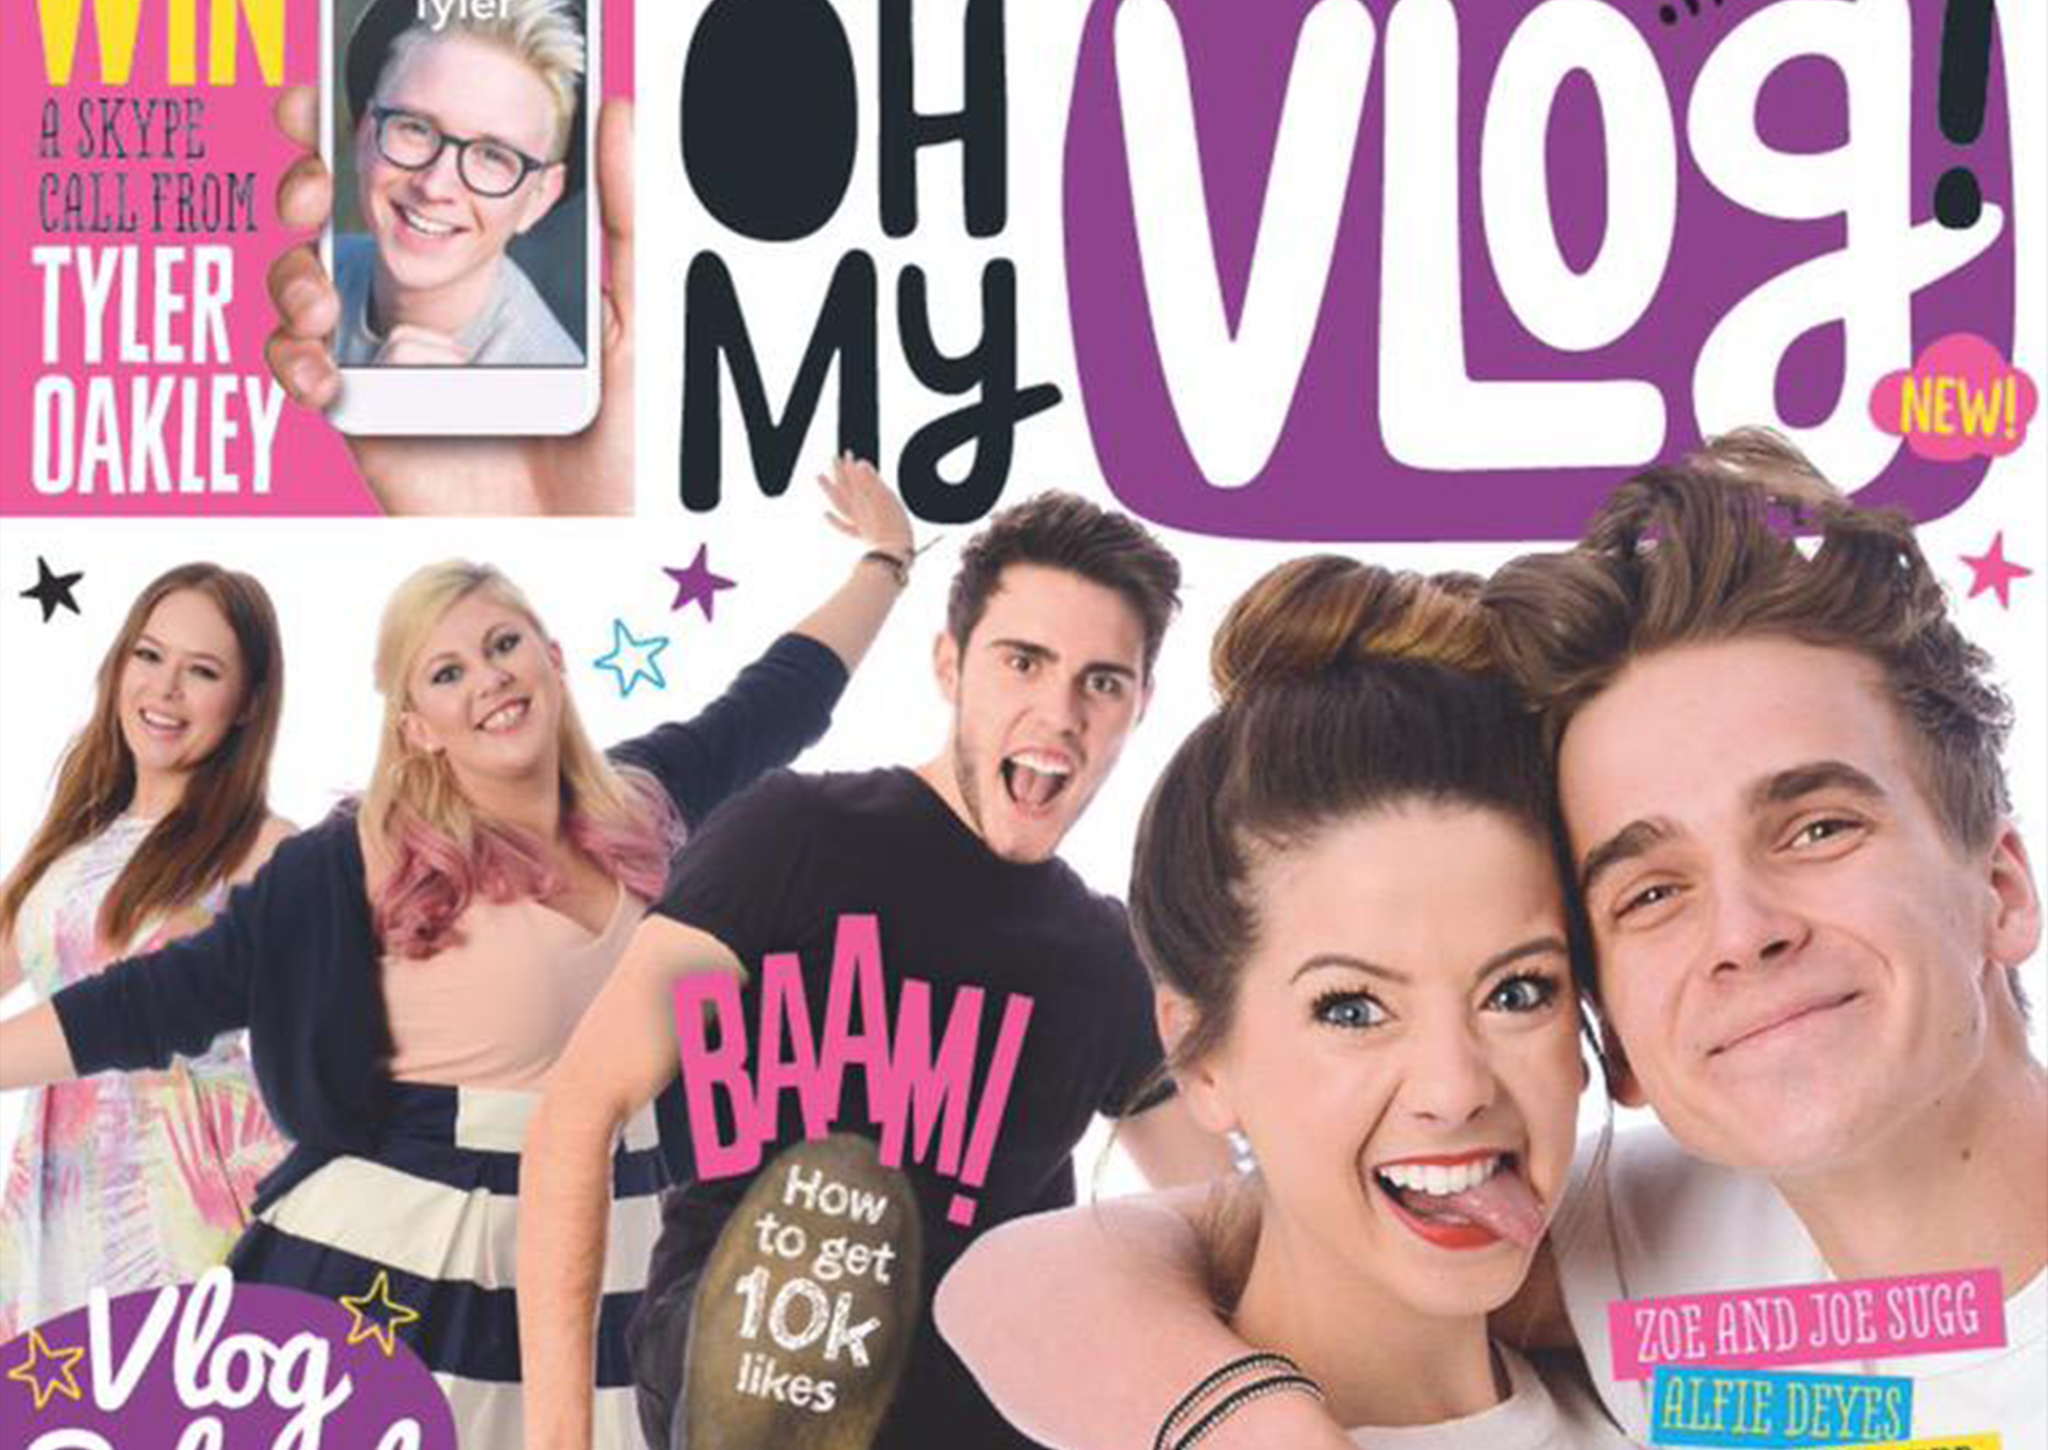 The front page of Oh My Vlog, issue one